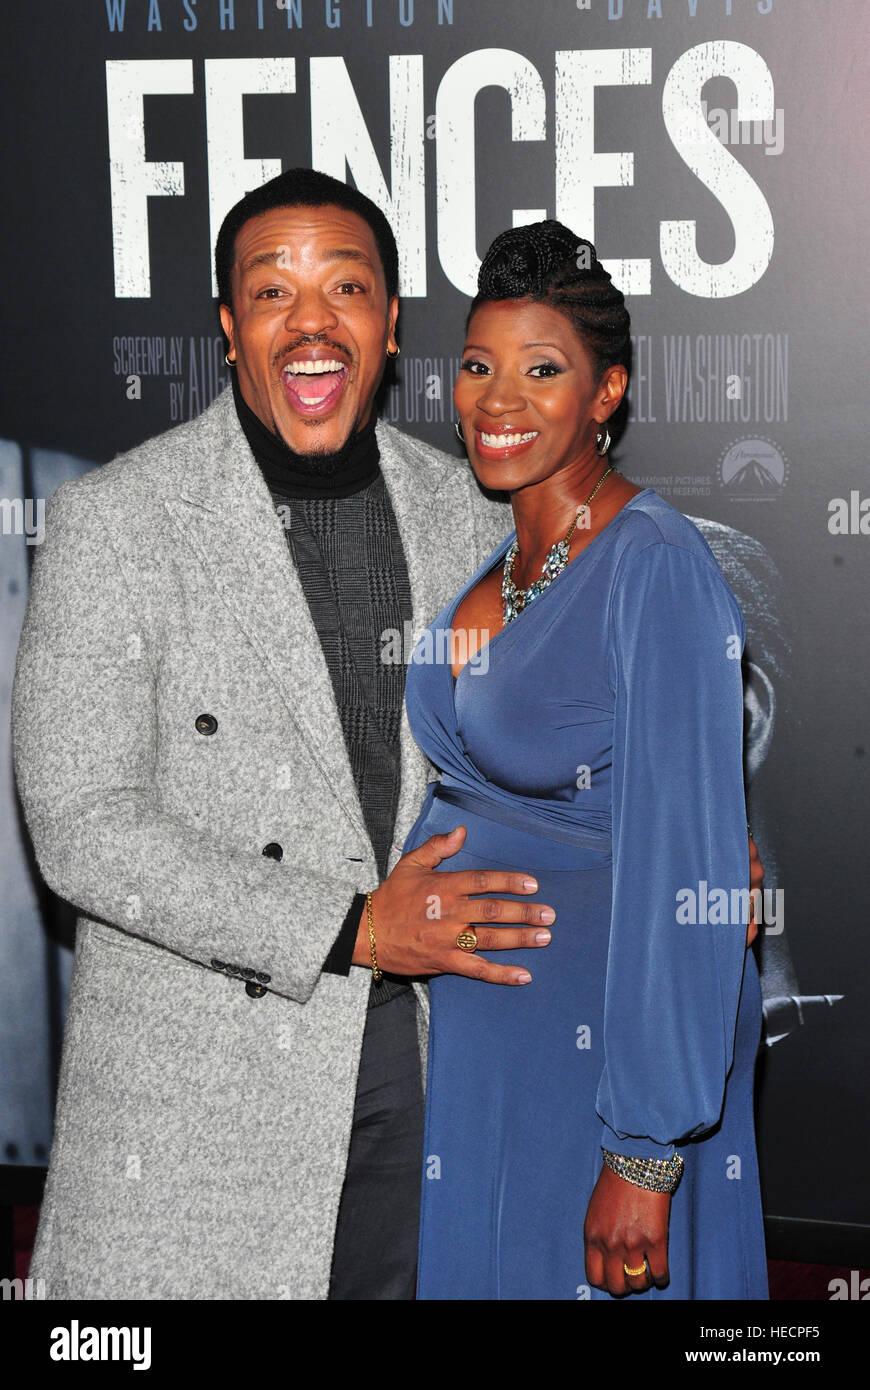 New York Usa 19th Dec 16 Russell Hornsby Denise Walker Attends The Fences New York Screening At Rose Theater Jazz At Lincoln Center On December 19 16 In New York City Credit